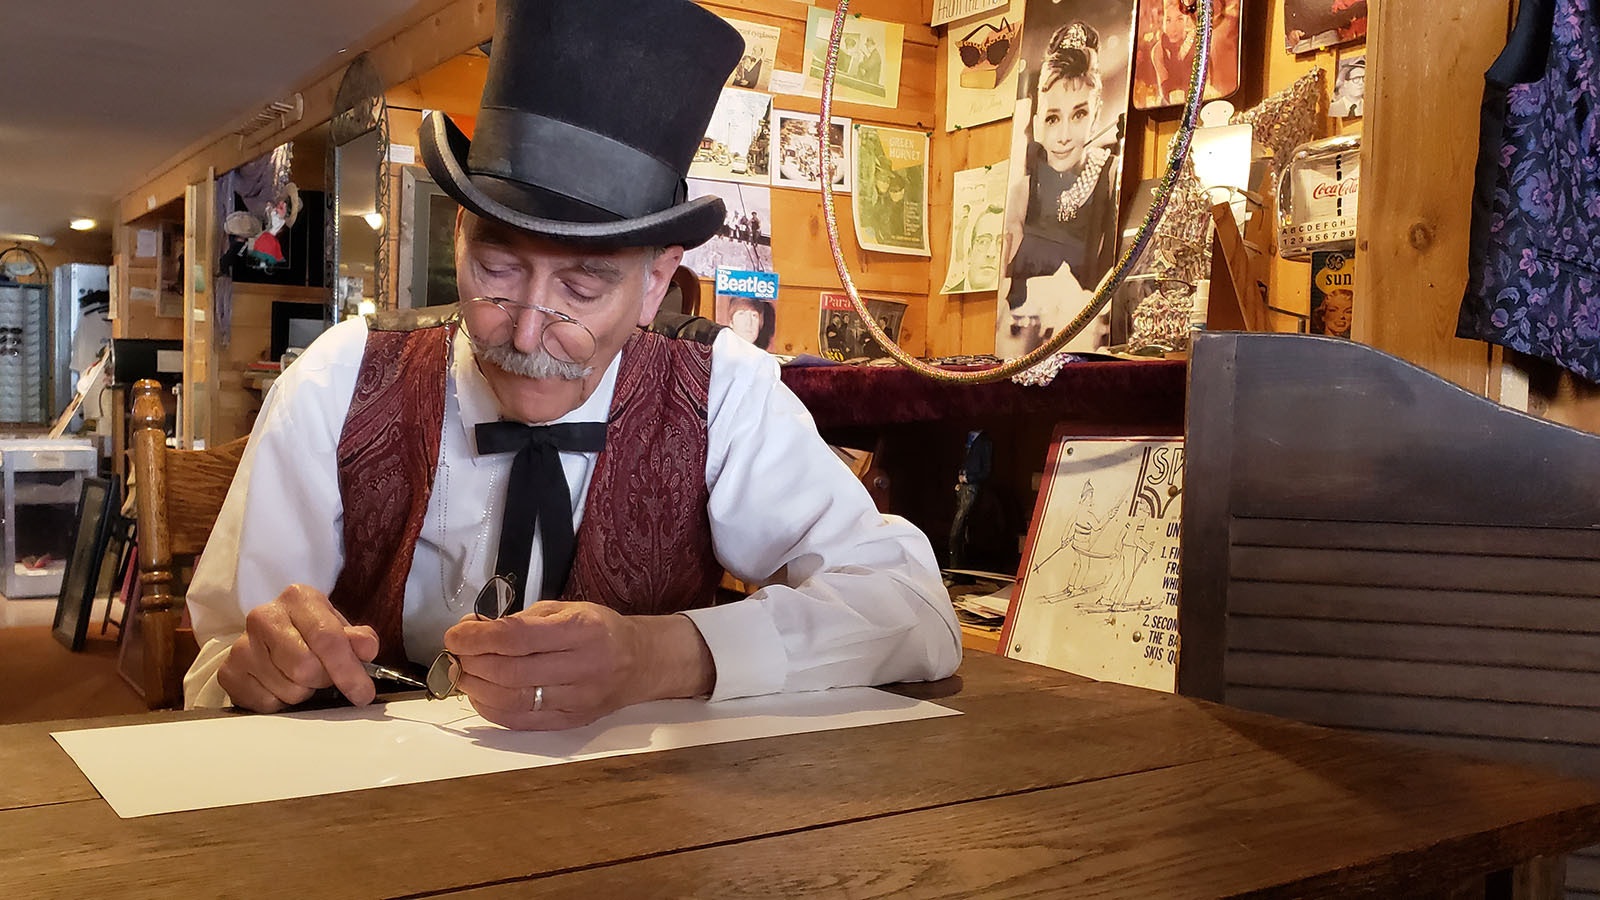 Steve Grabowski of Laramie is one of the world's last old-time opticians. He even dresses in period costume and has been known to make a house call or two.